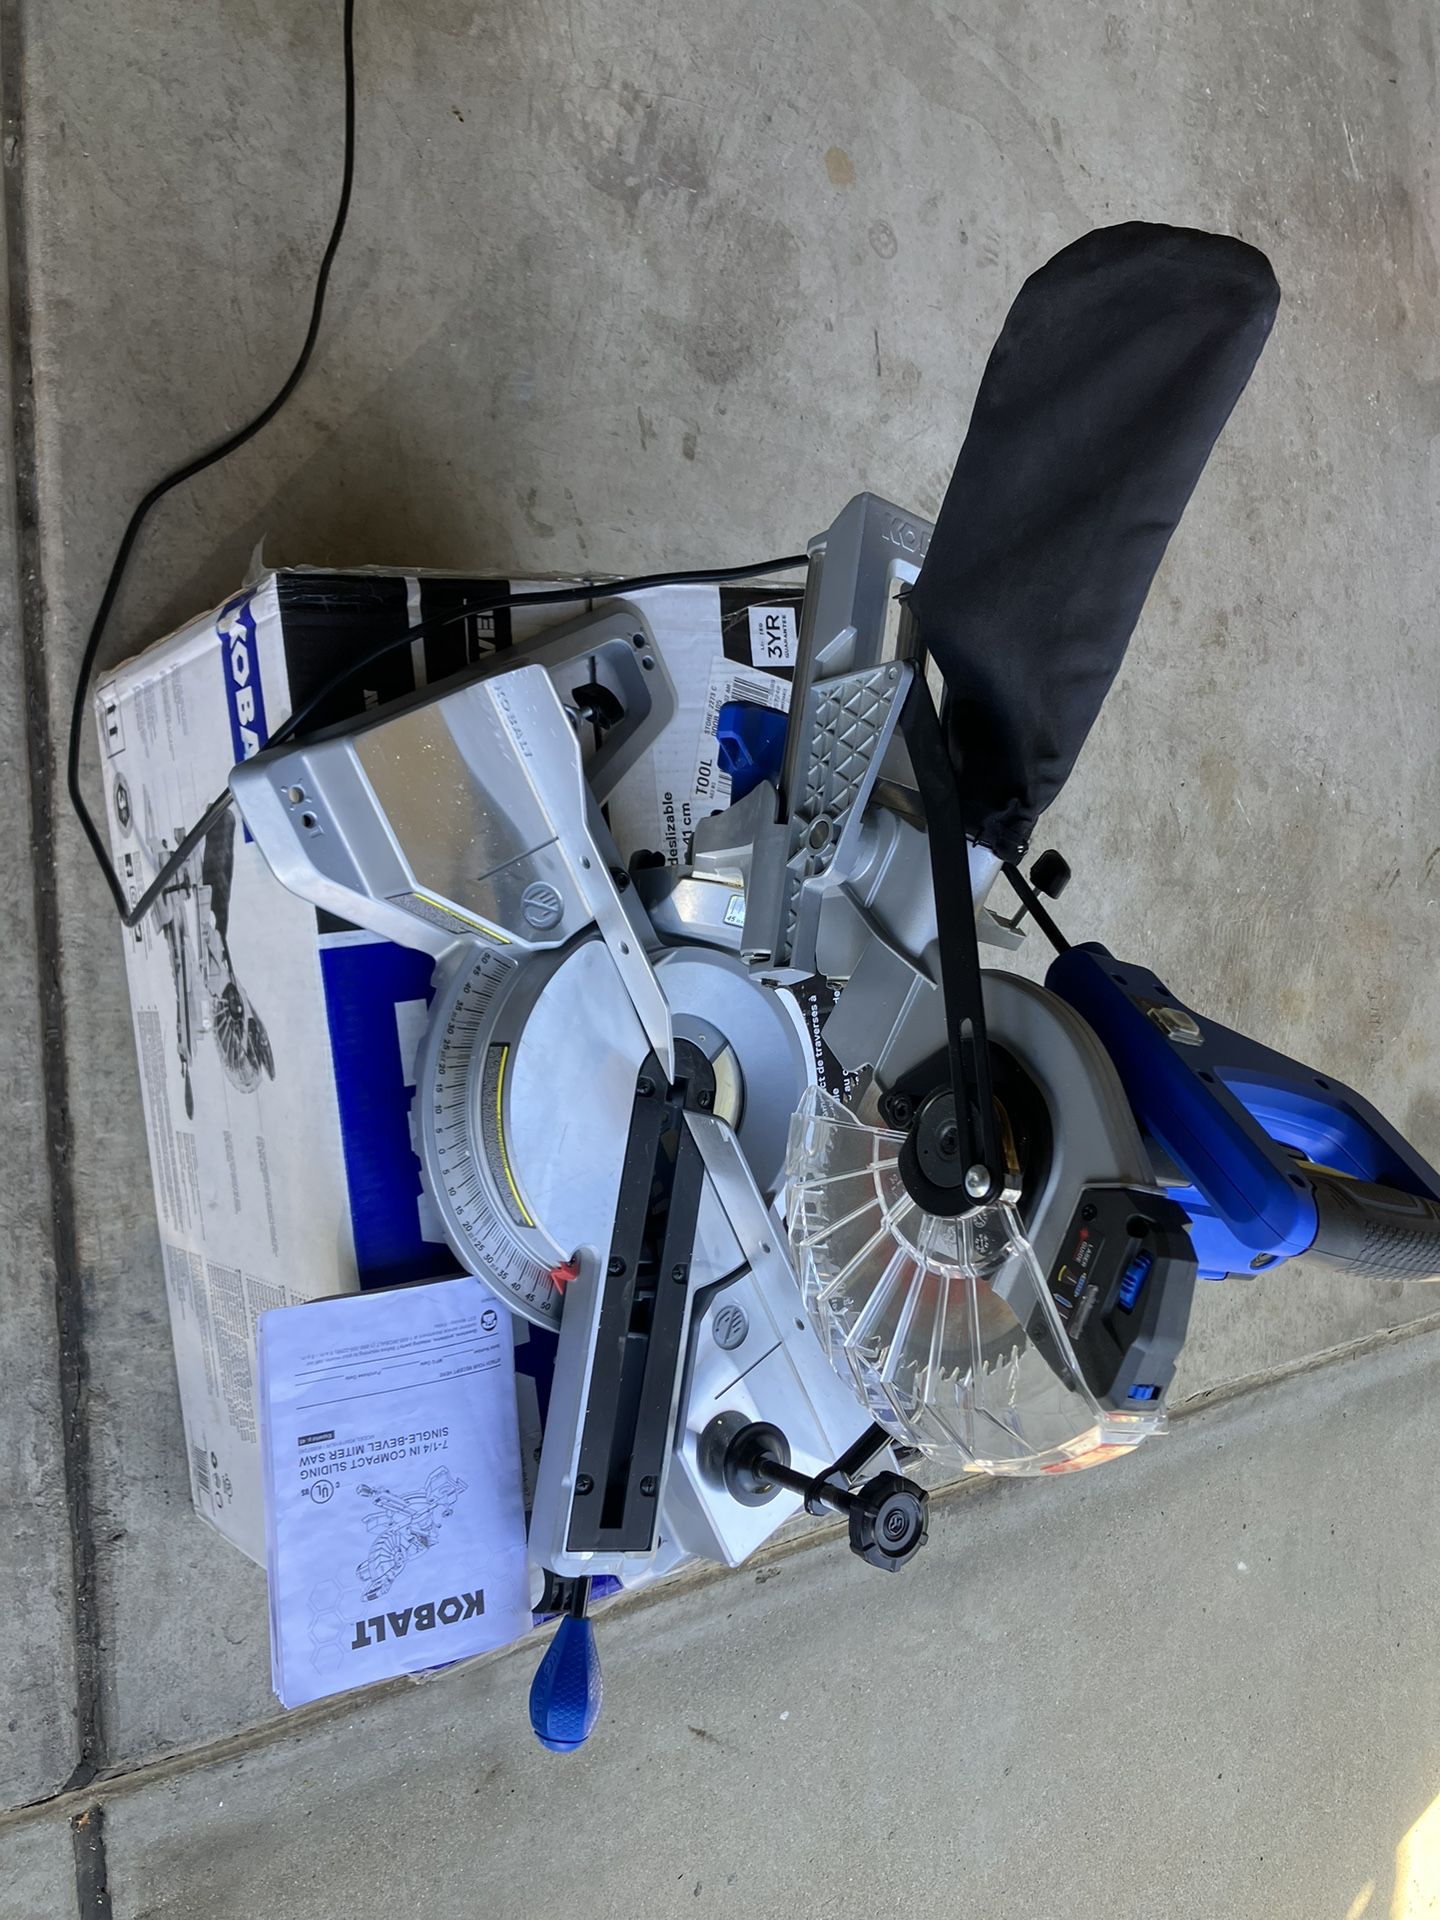 Kobalt 7-1/4 In Compact Sliding Miter Saw. Model 0857240  Like New. Used Once. Price Is Not Negotiable. 